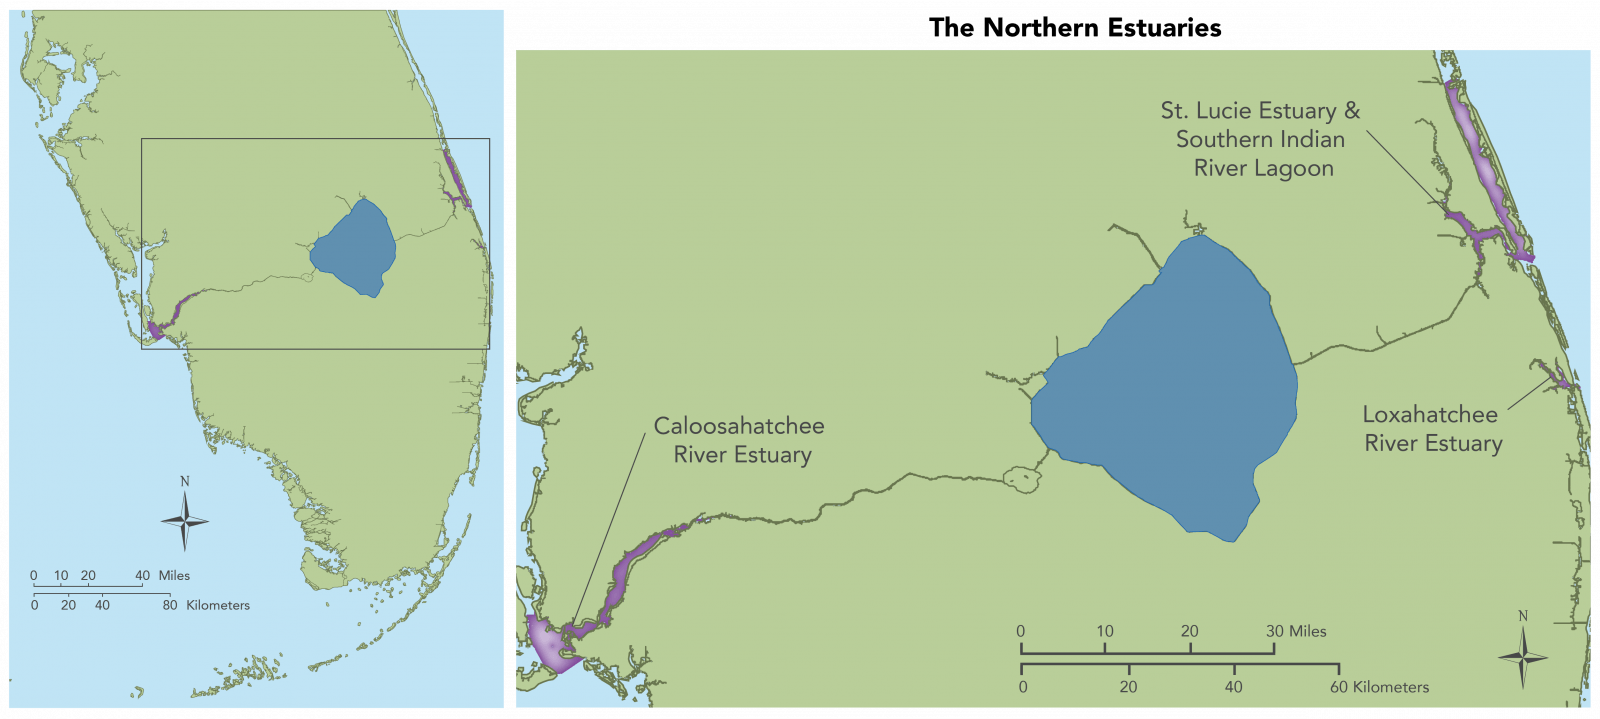  Map showing long view and detail view of the Northenr Estuaries. This includes the Caloosahatchee River Estuary, the St. Lucie Estuary and Southern Indian River Lagoon, and the Loxahatchee River Estuary